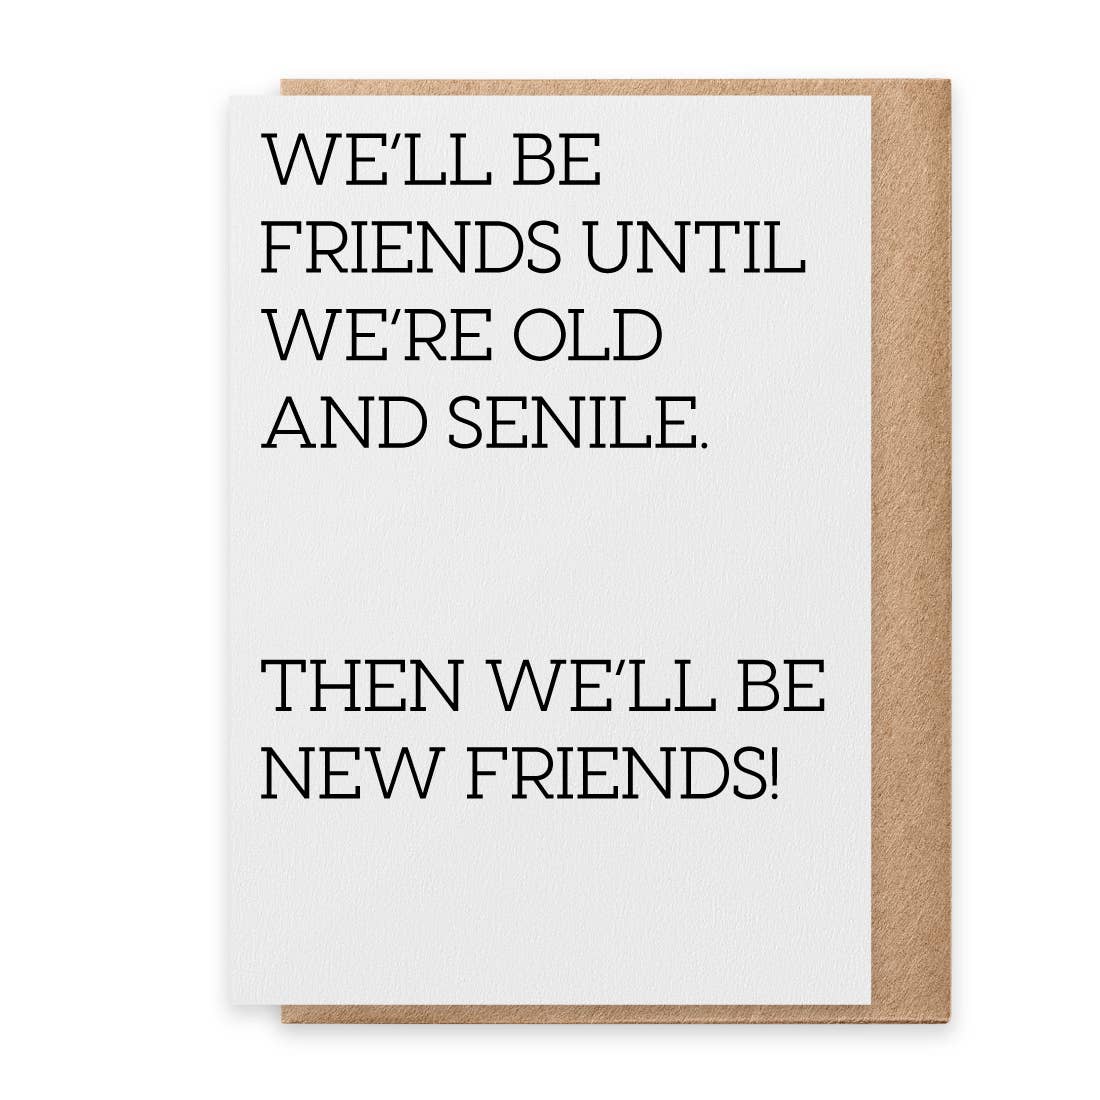 Old and Senile - Greeting Card